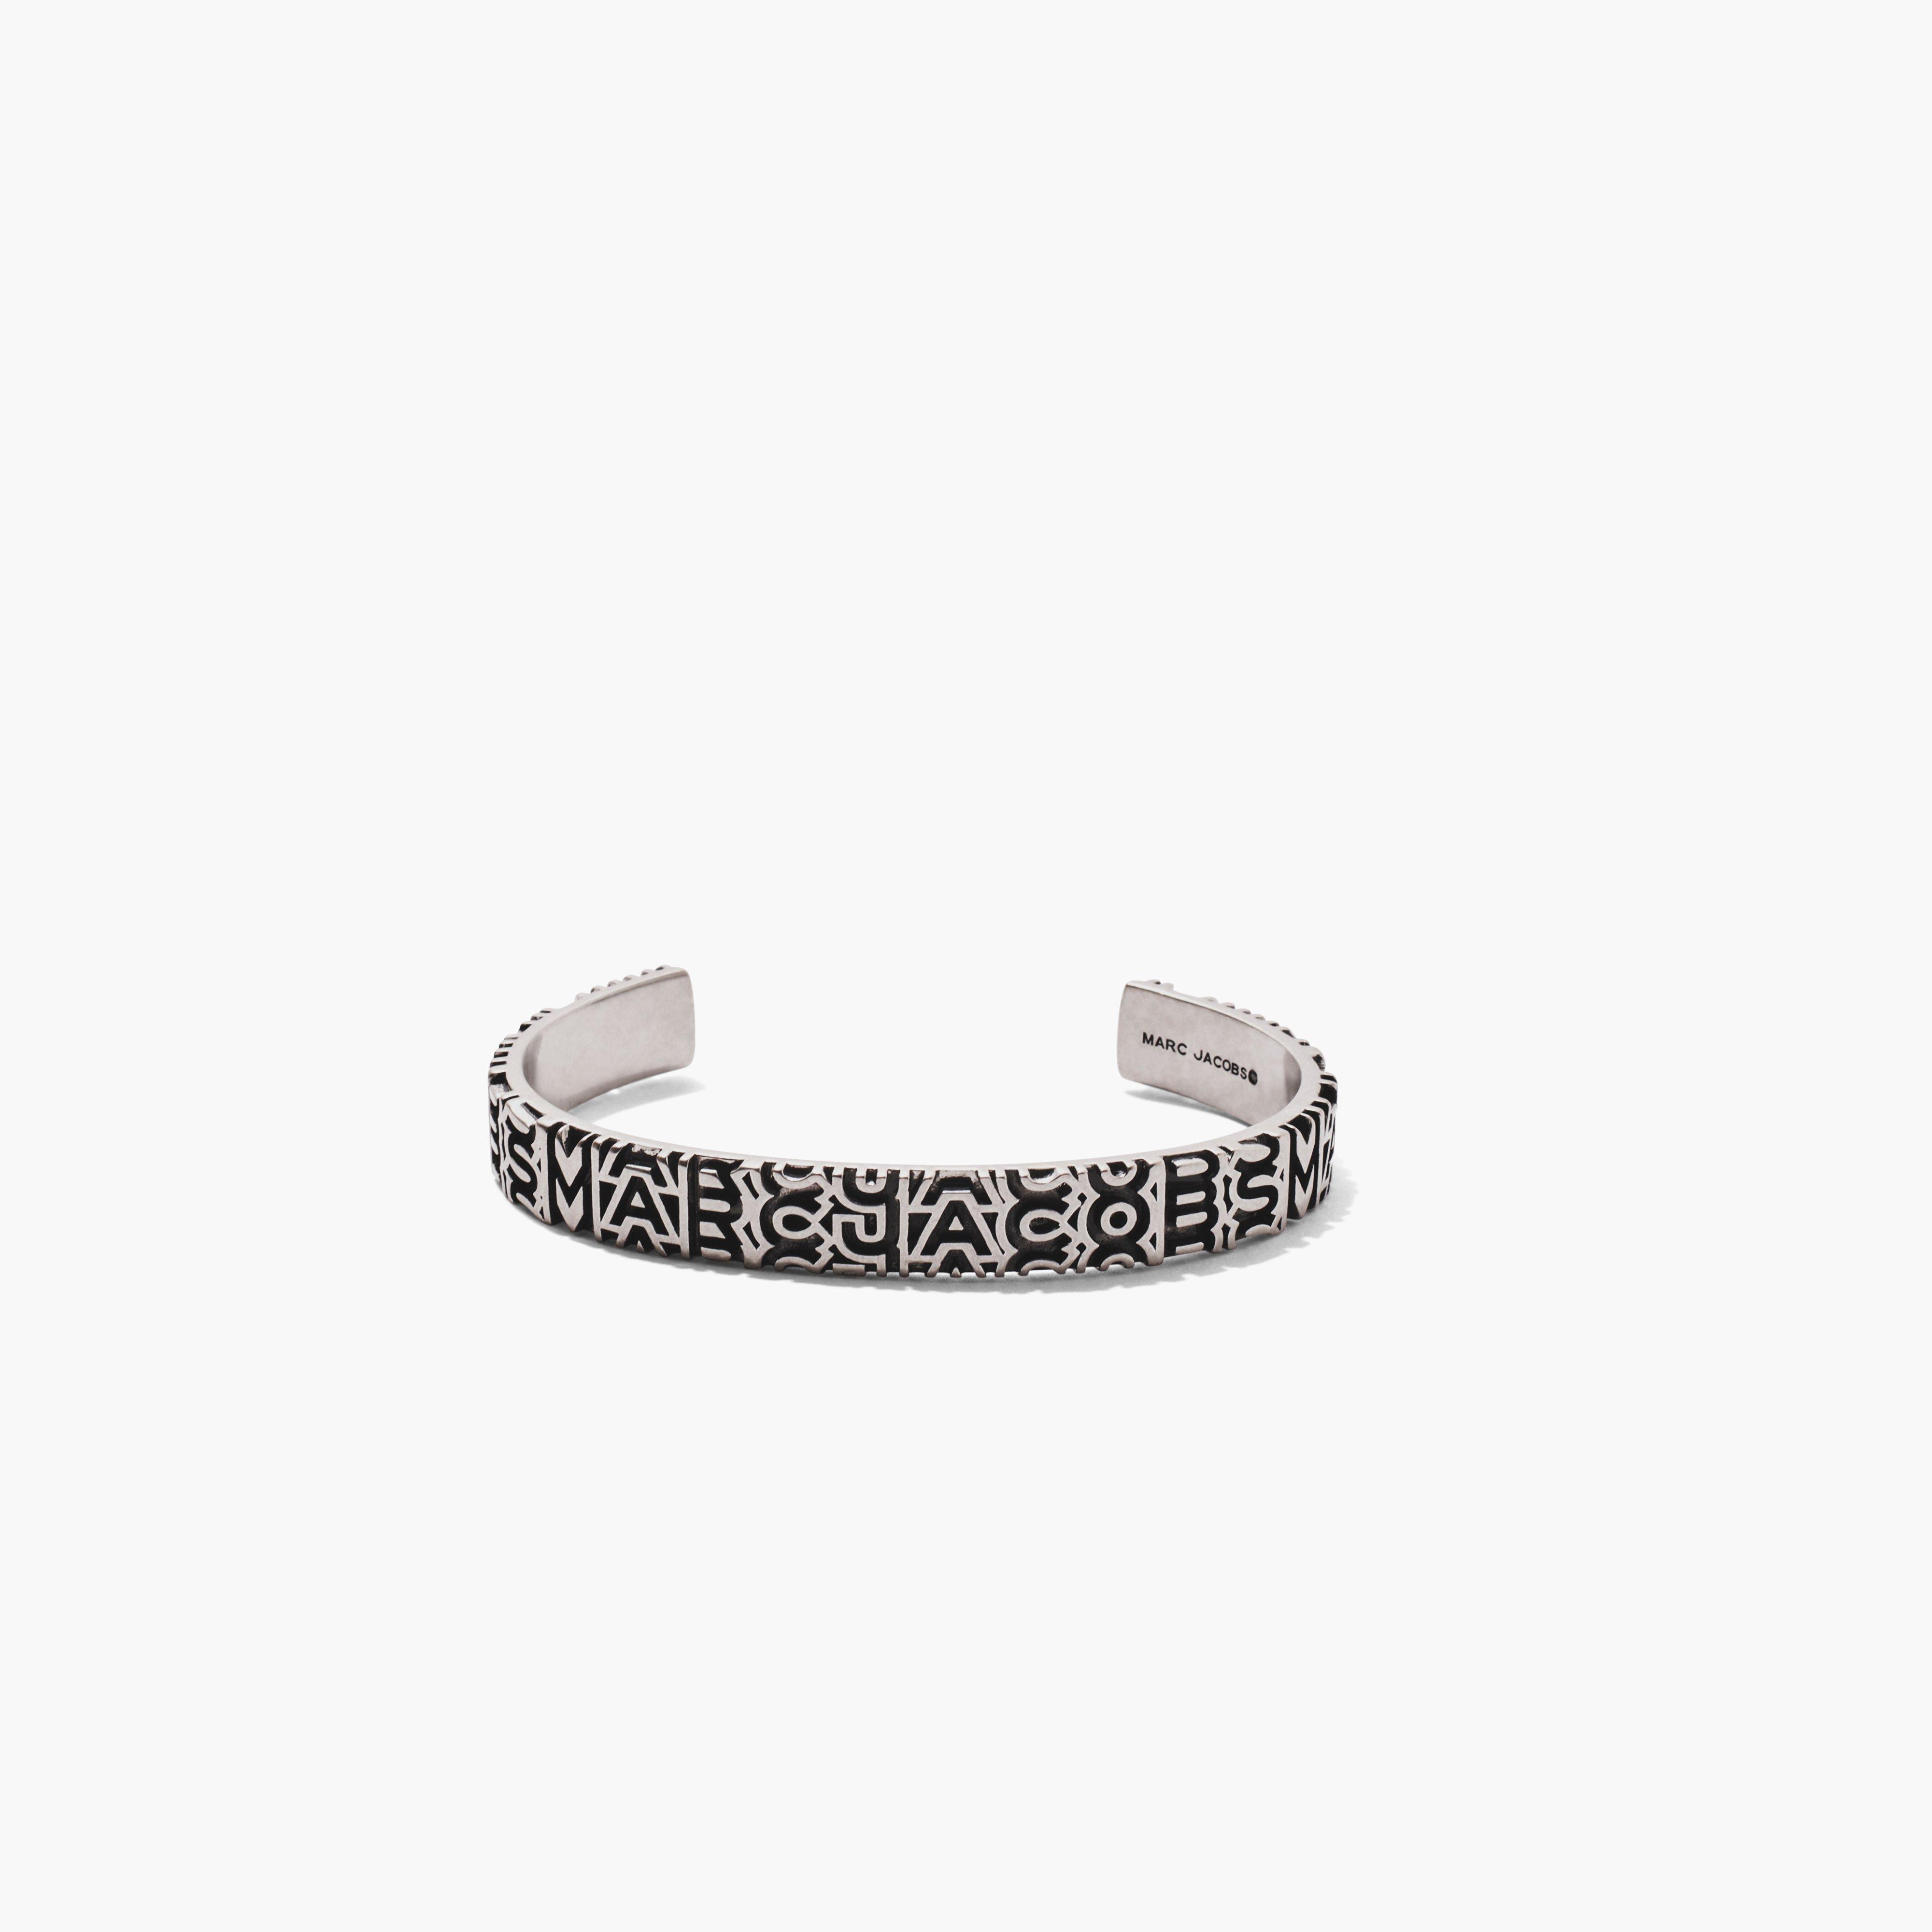 Marc by Marc jacobs The Monogram Engraved Bracelet,AGED SILVER